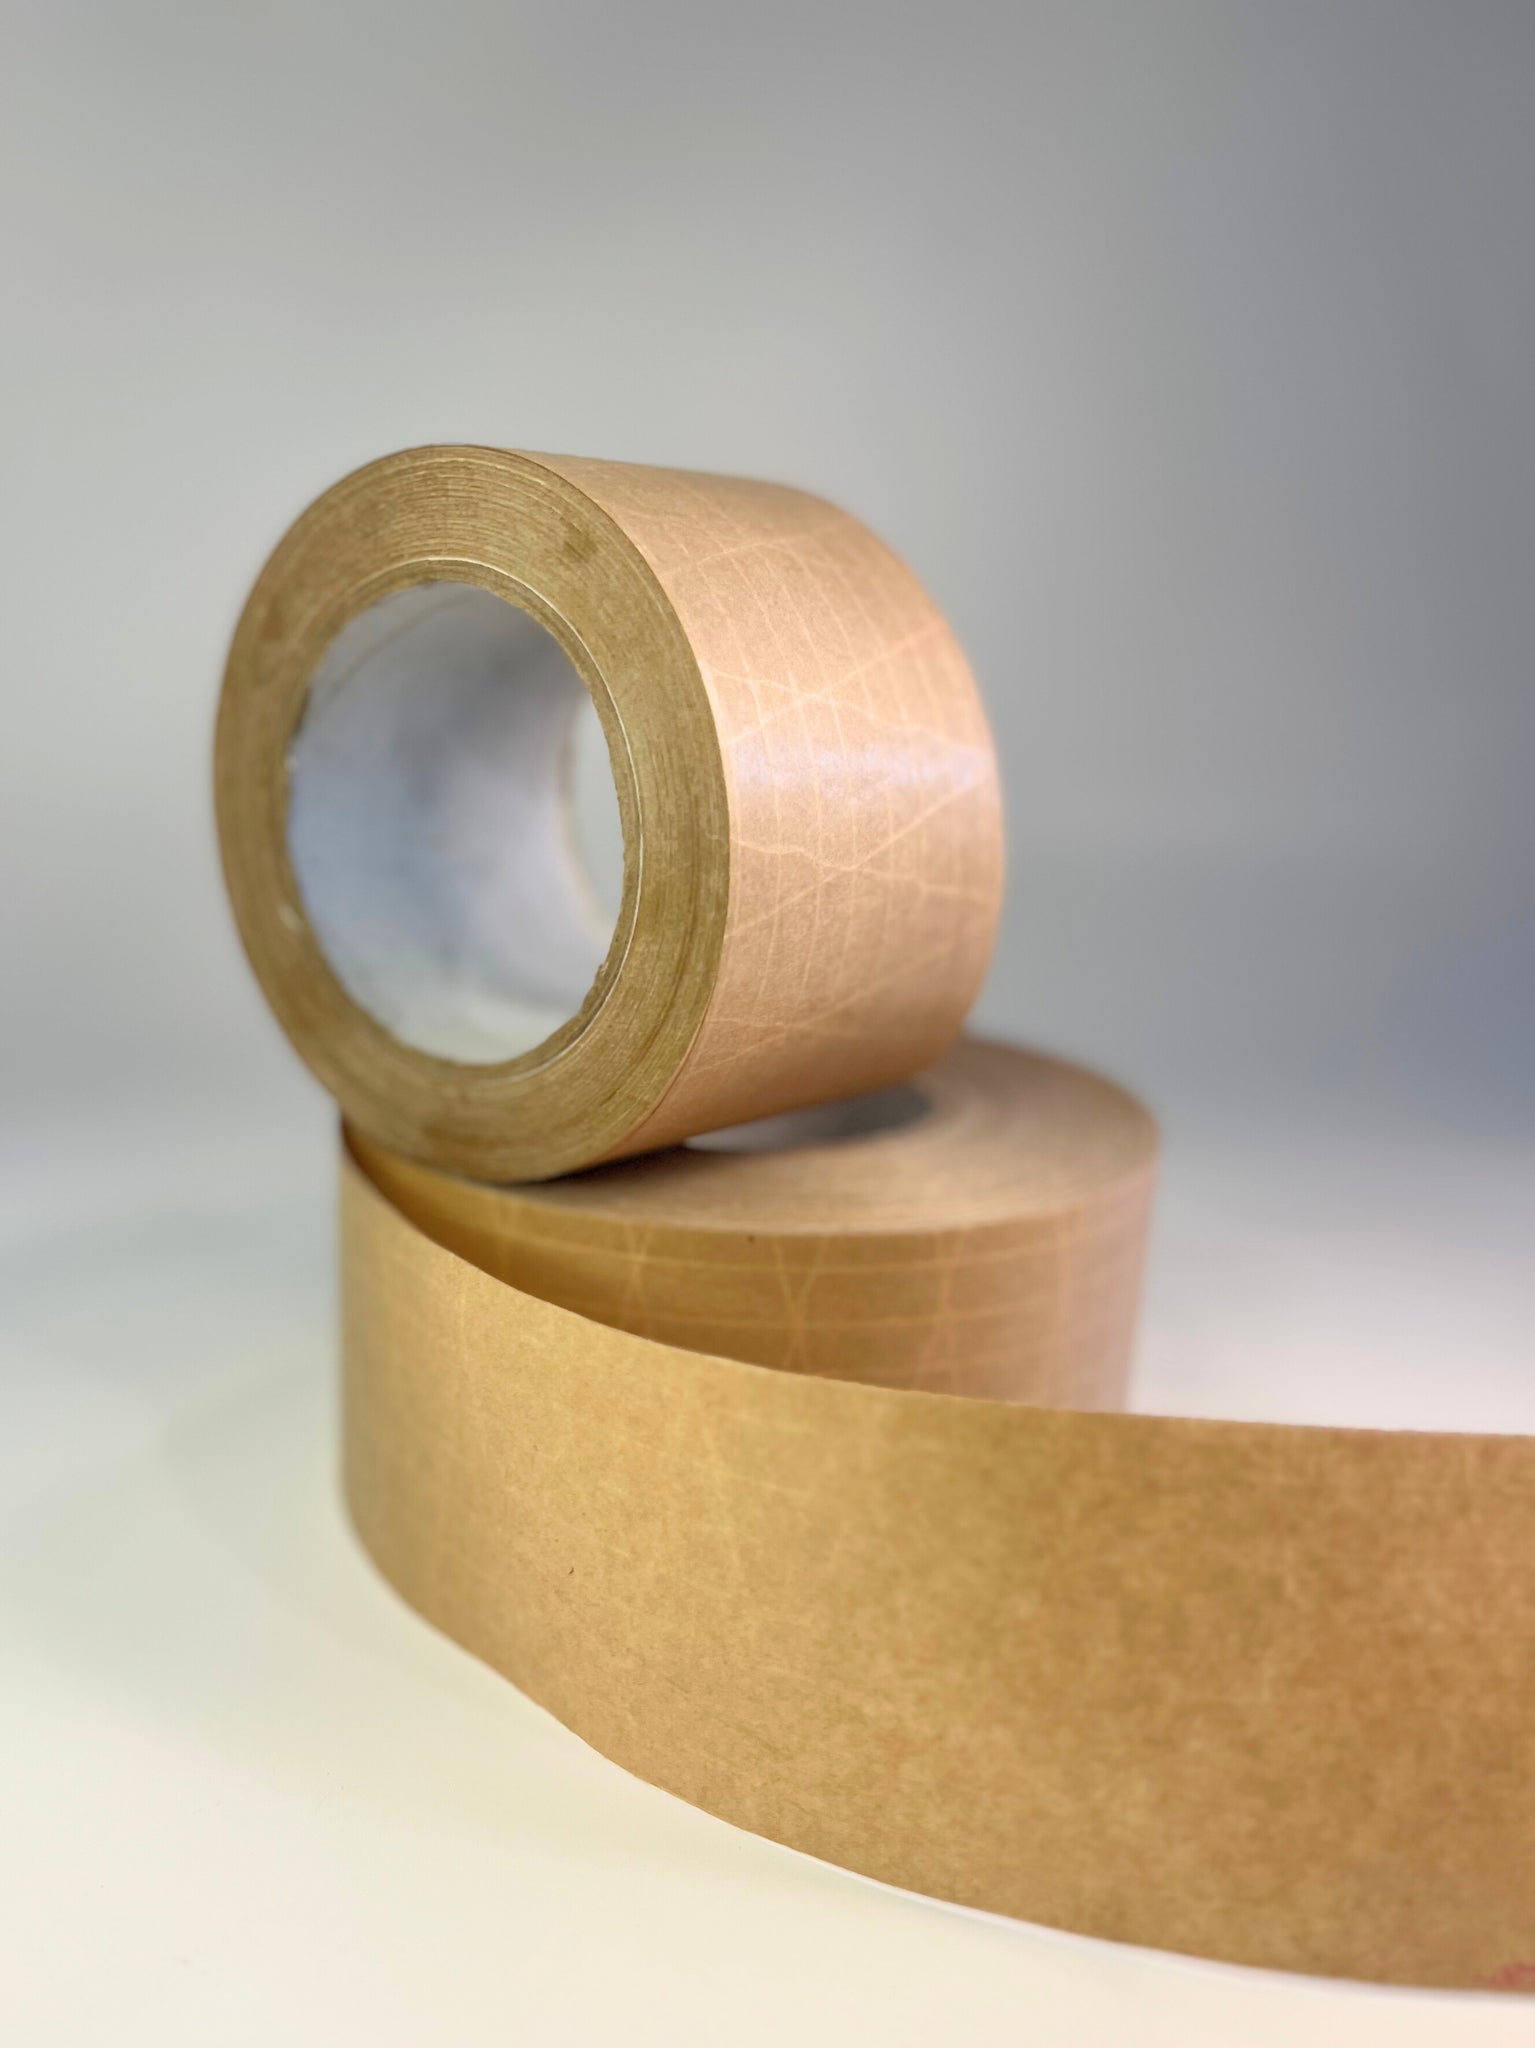 BROWN TAPE WATER ACTIVATED AND TAPE FOR GIFT WRAPPING